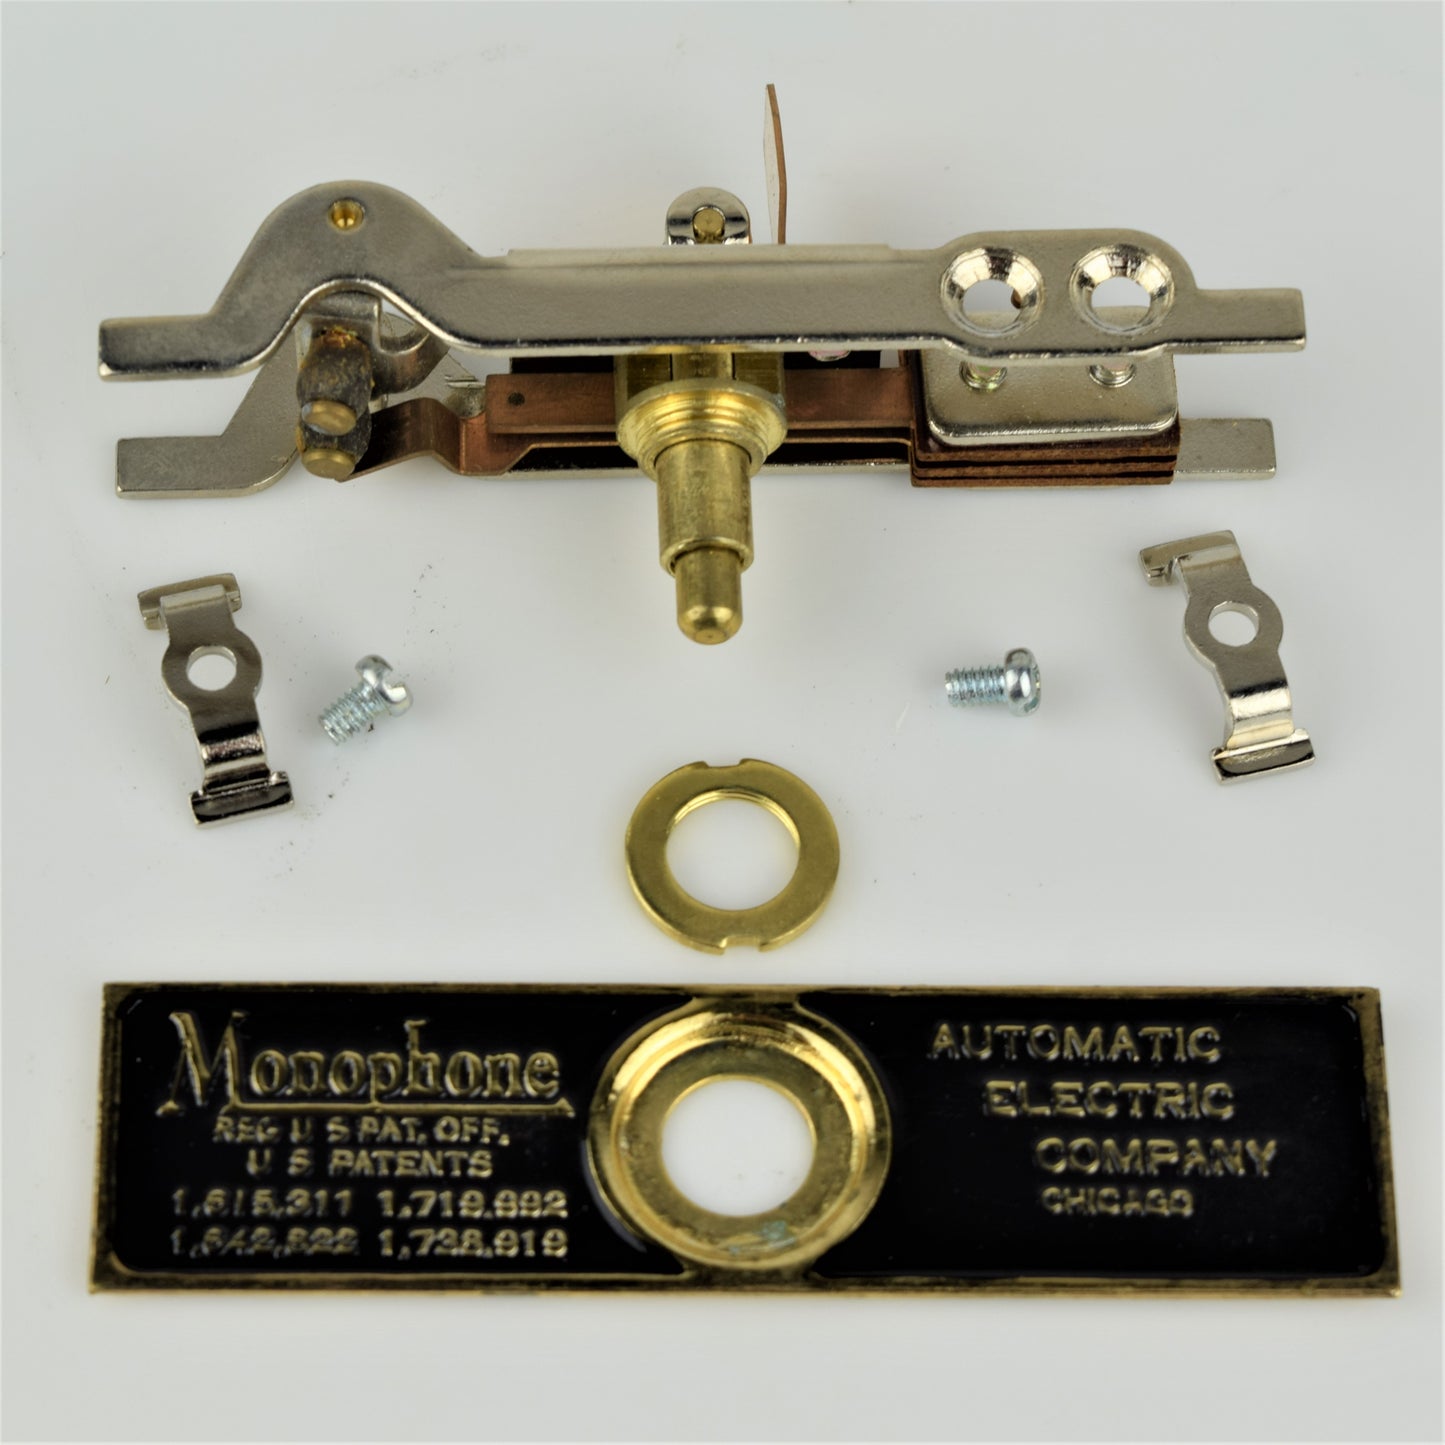 Automatic Electric style Switch Assembly (Repro)